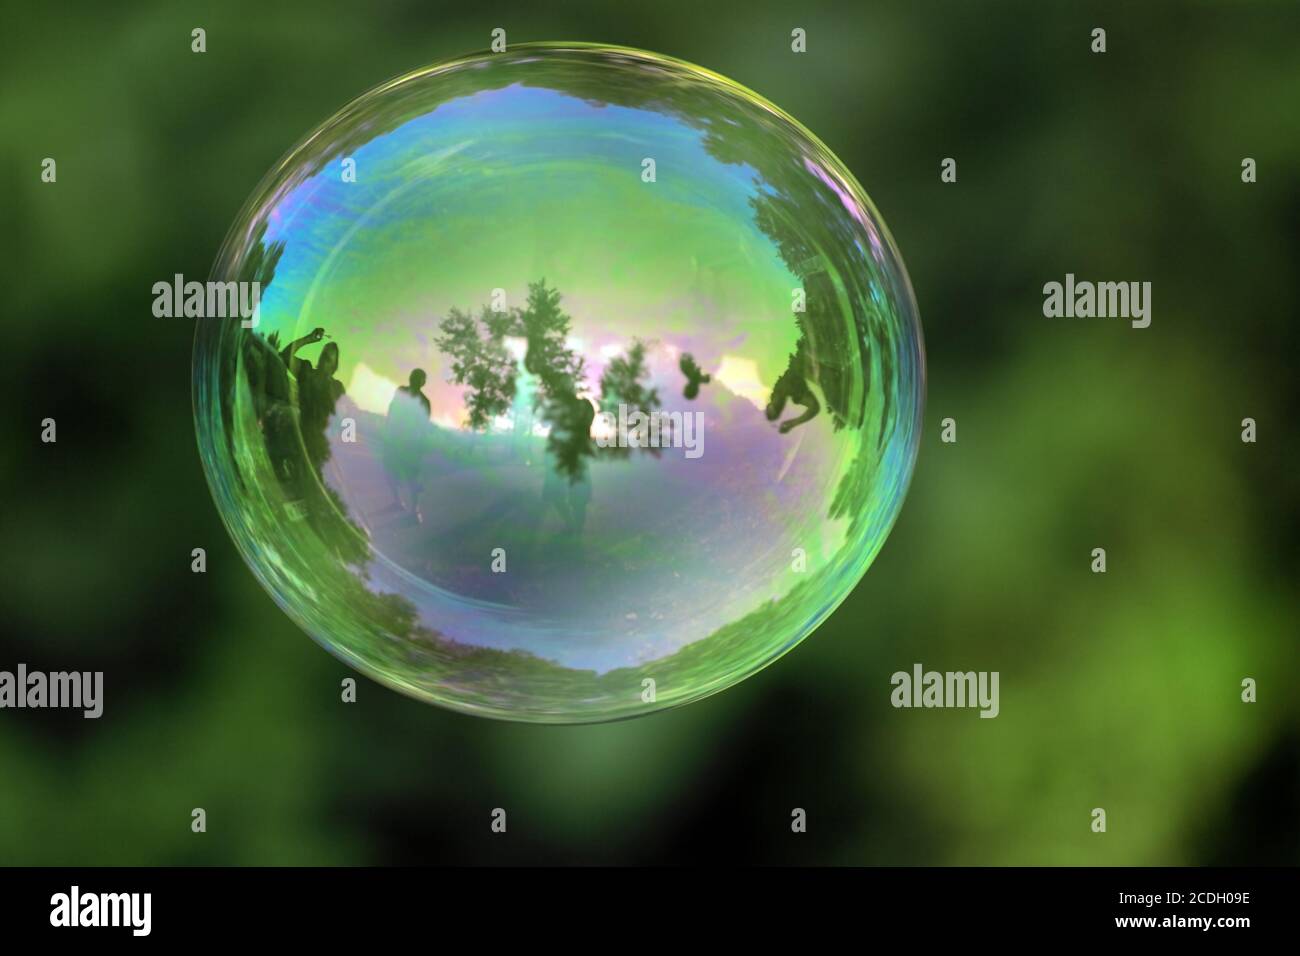 transparent bubble with reflections on a green org Stock Photo